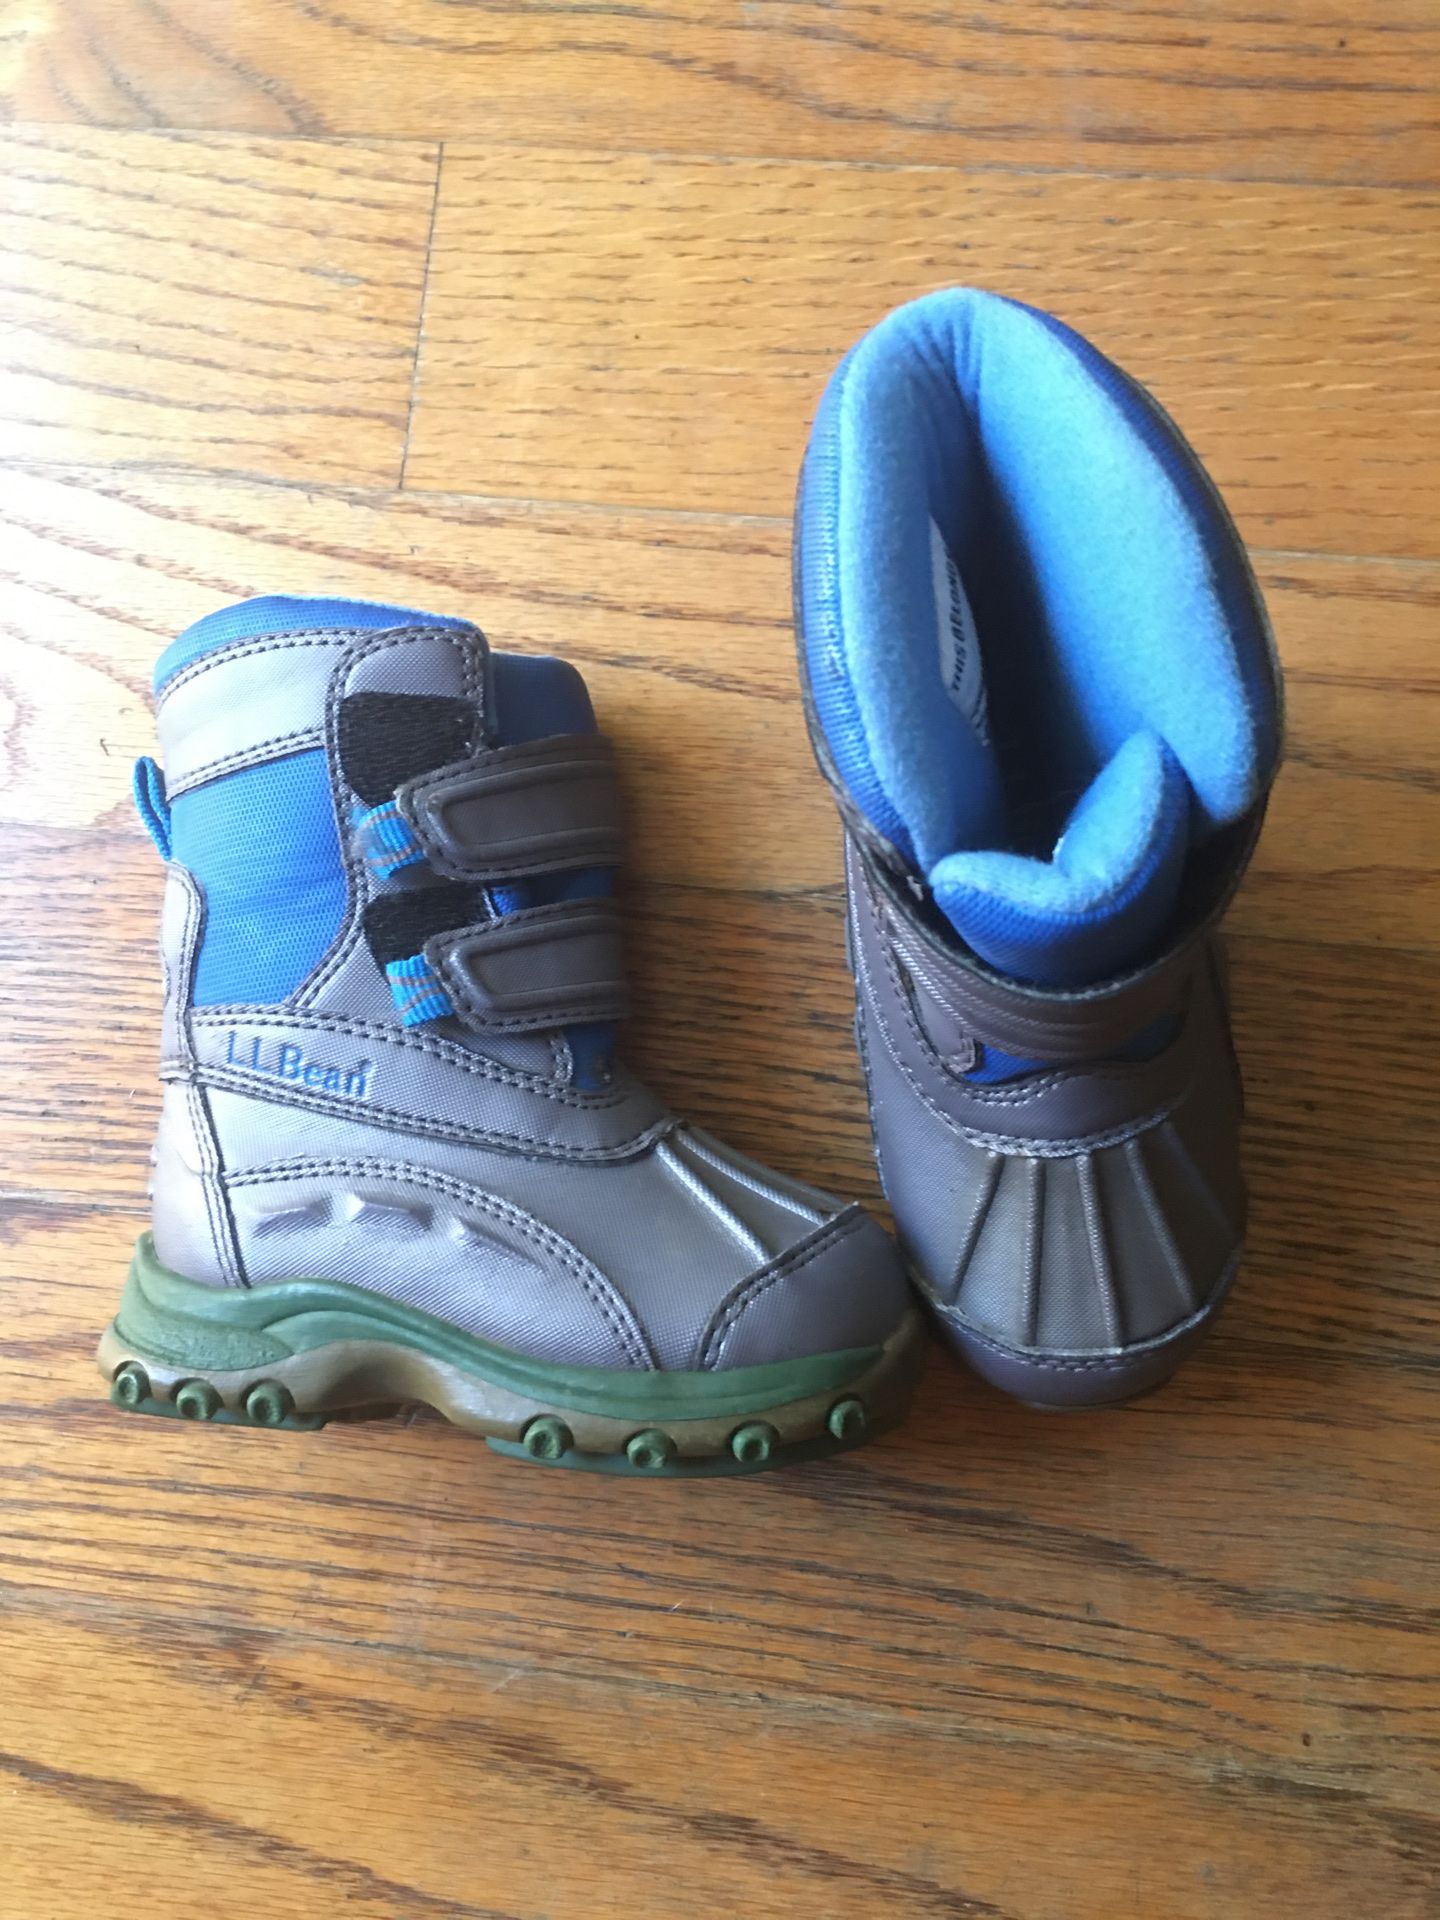 LL Bean Snow Boots for toddlers size 5